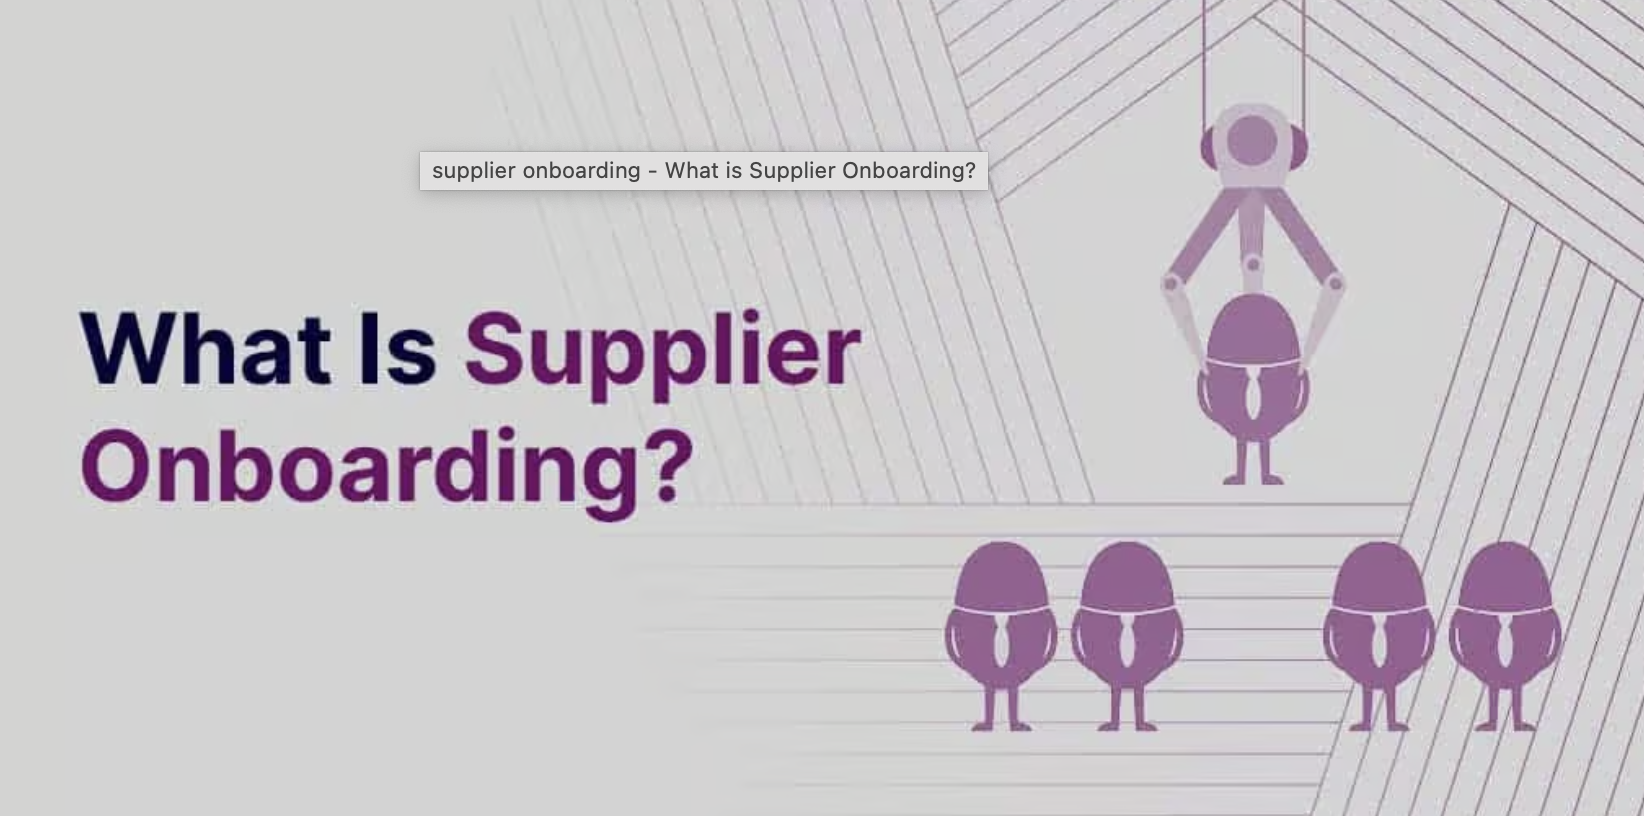 Strengthening Supplier Onboarding: A Dual Focus on Compliance and Fraud Prevention